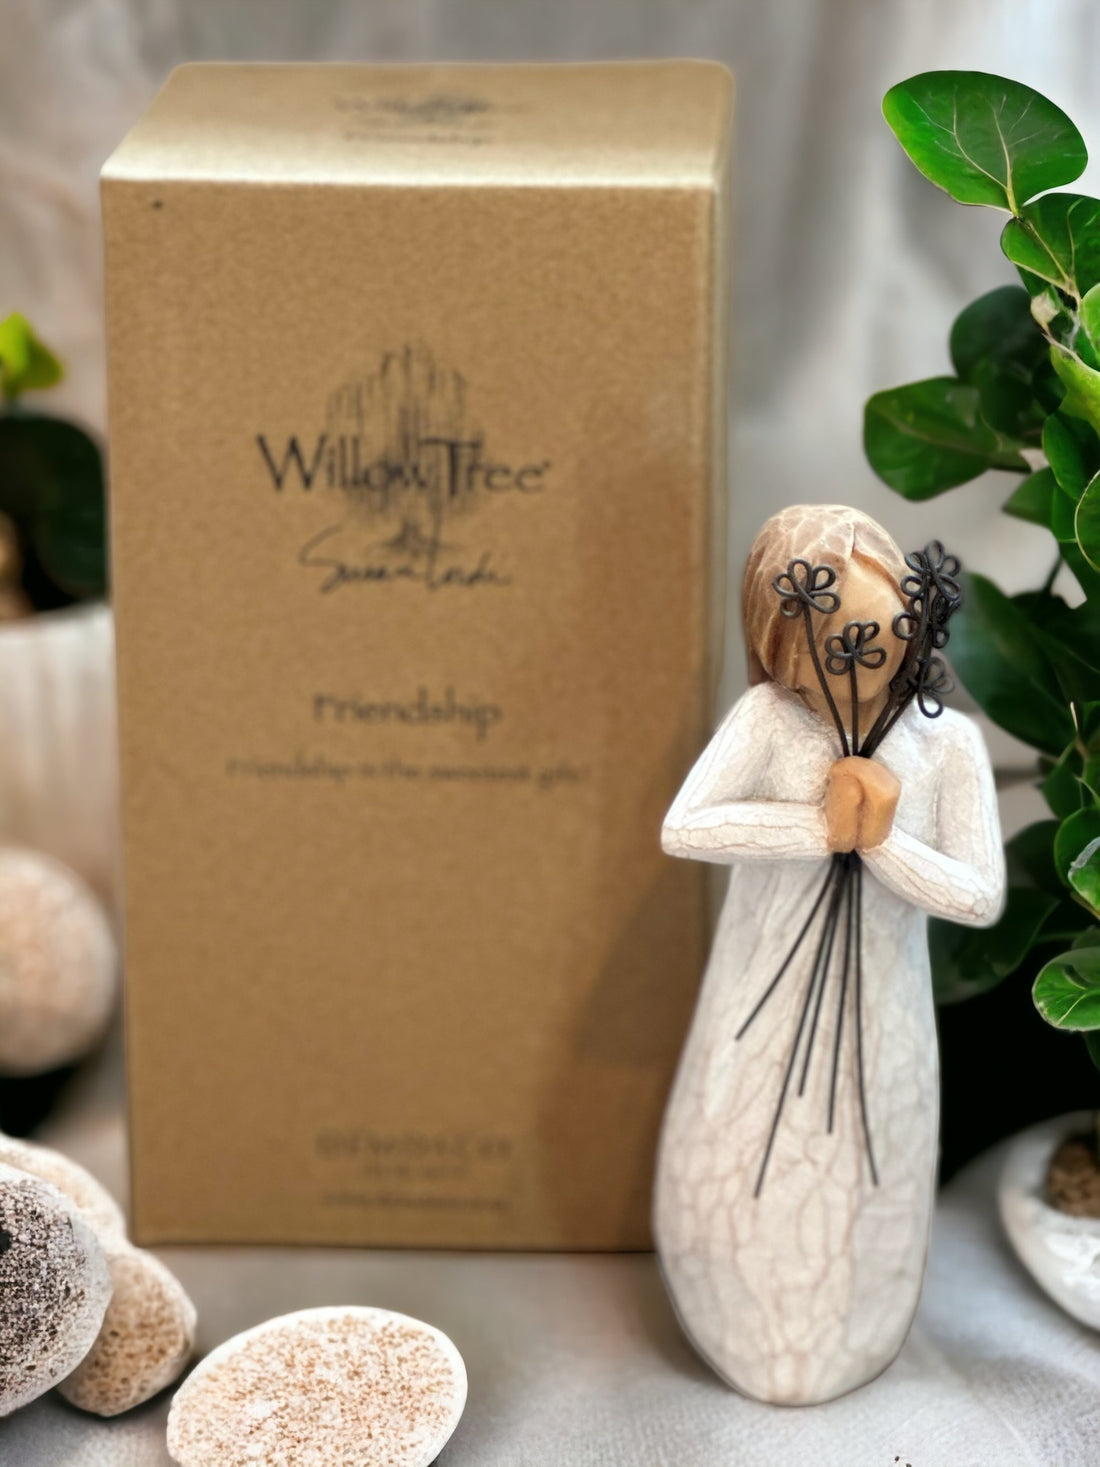 WillowTree Collection - Friendship